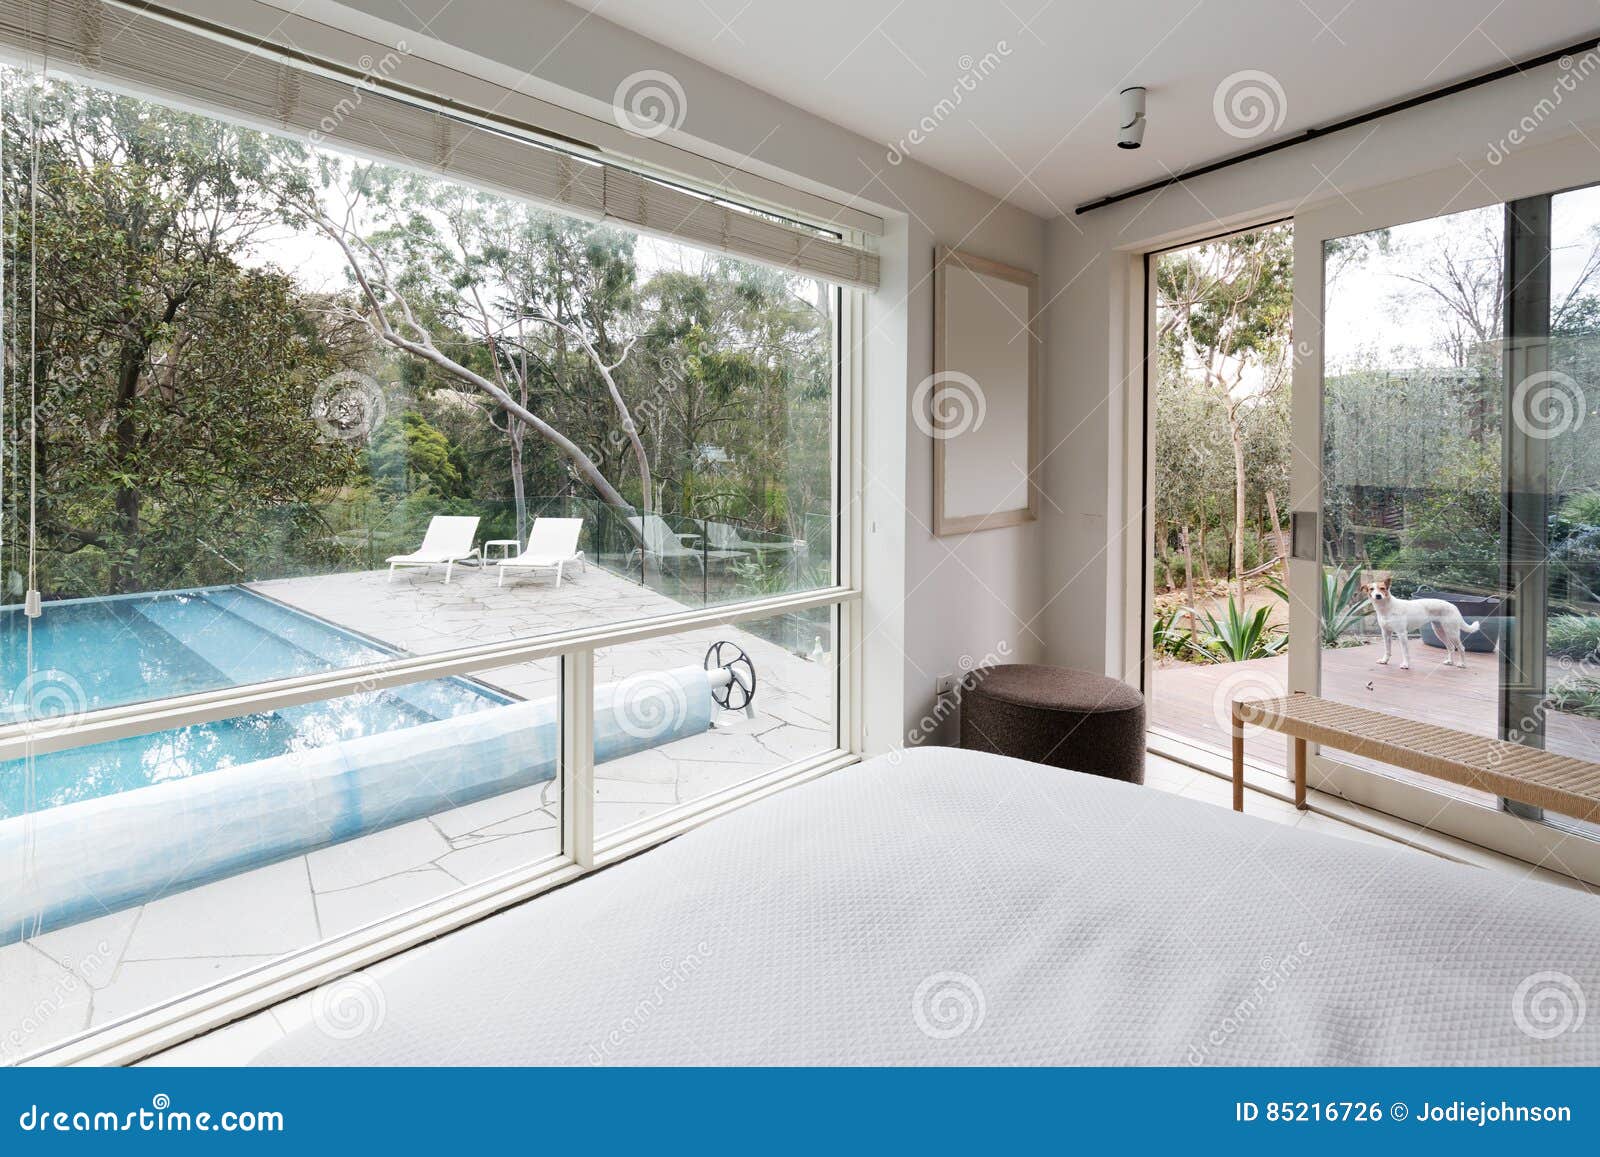 large windows showing view to pool and garden in luxury home